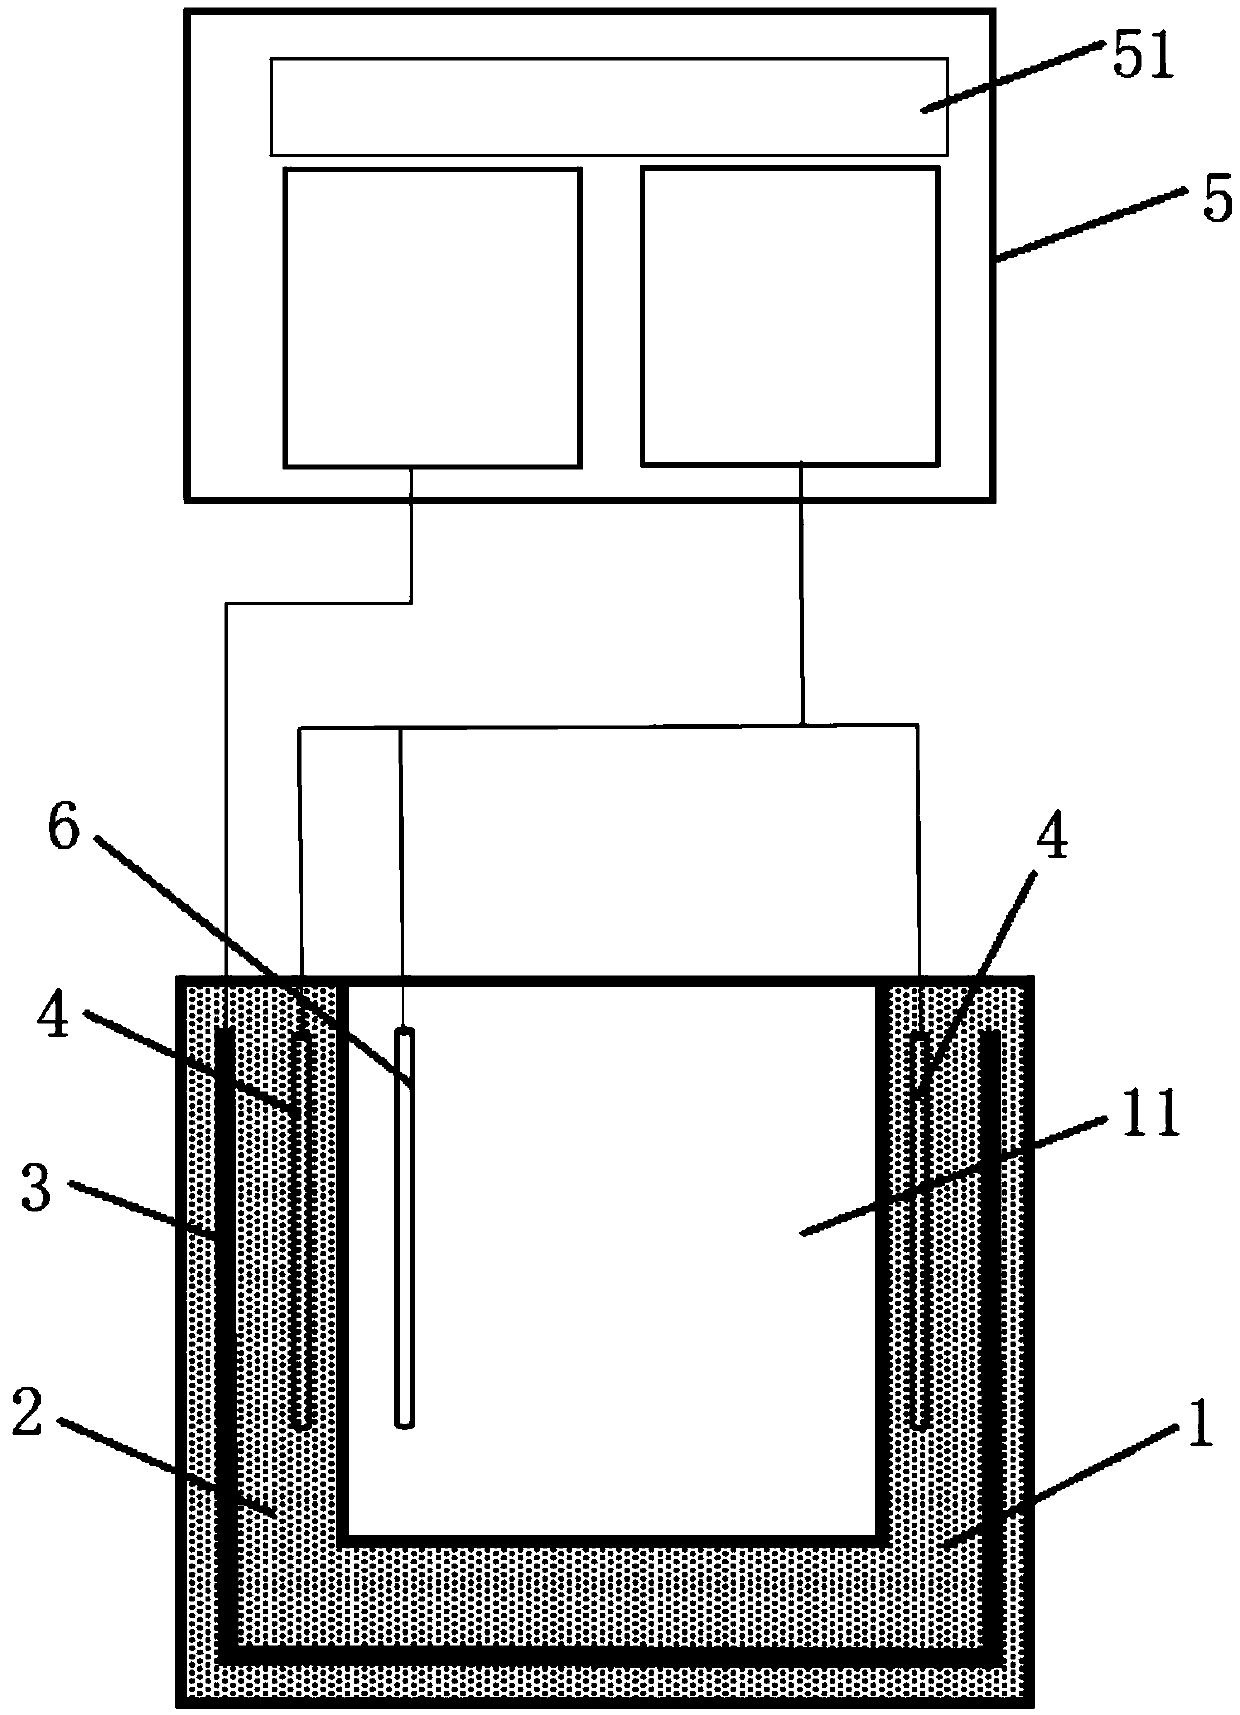 Constant temperature device based on phase-change material